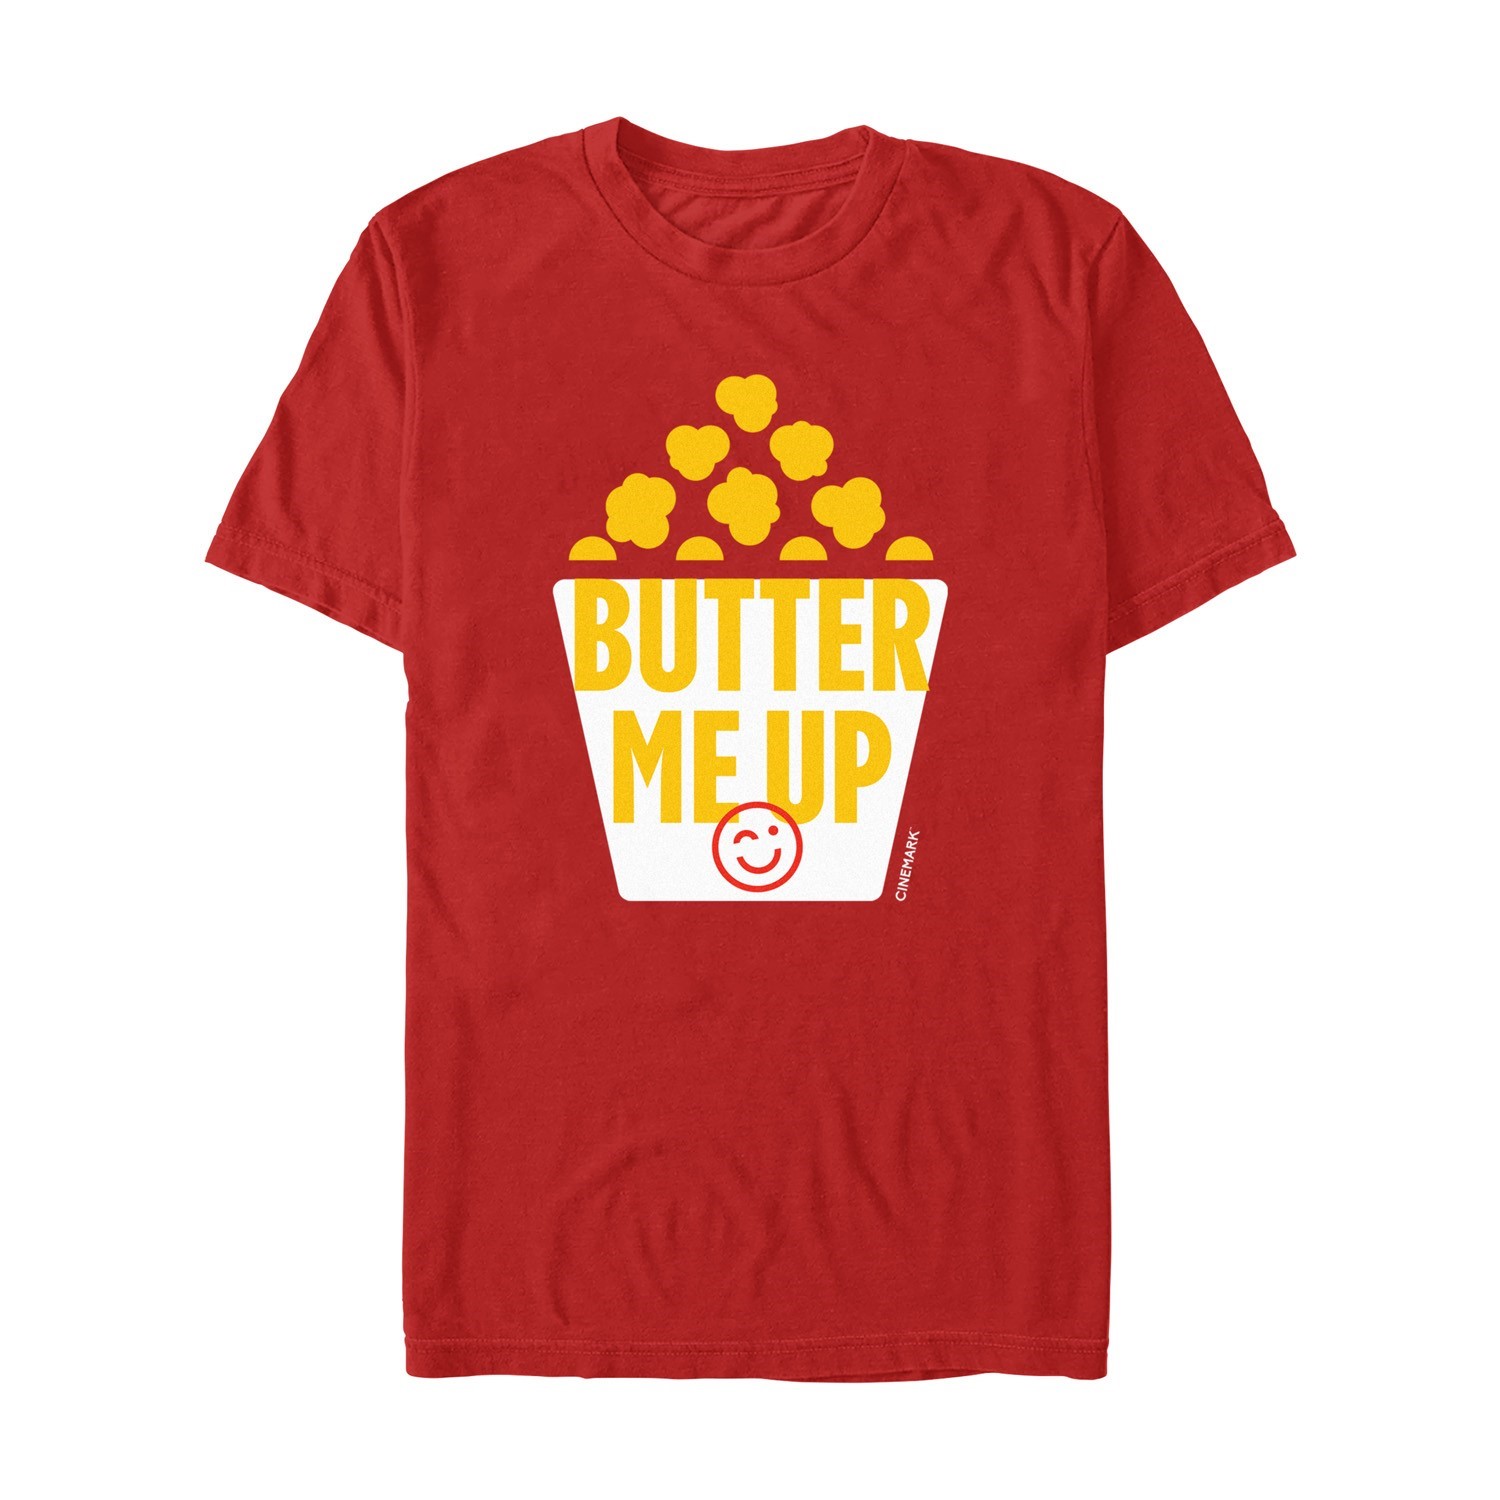 Cinemark "Butter Me Up" Adult Unisex T-shirt - Red 77004